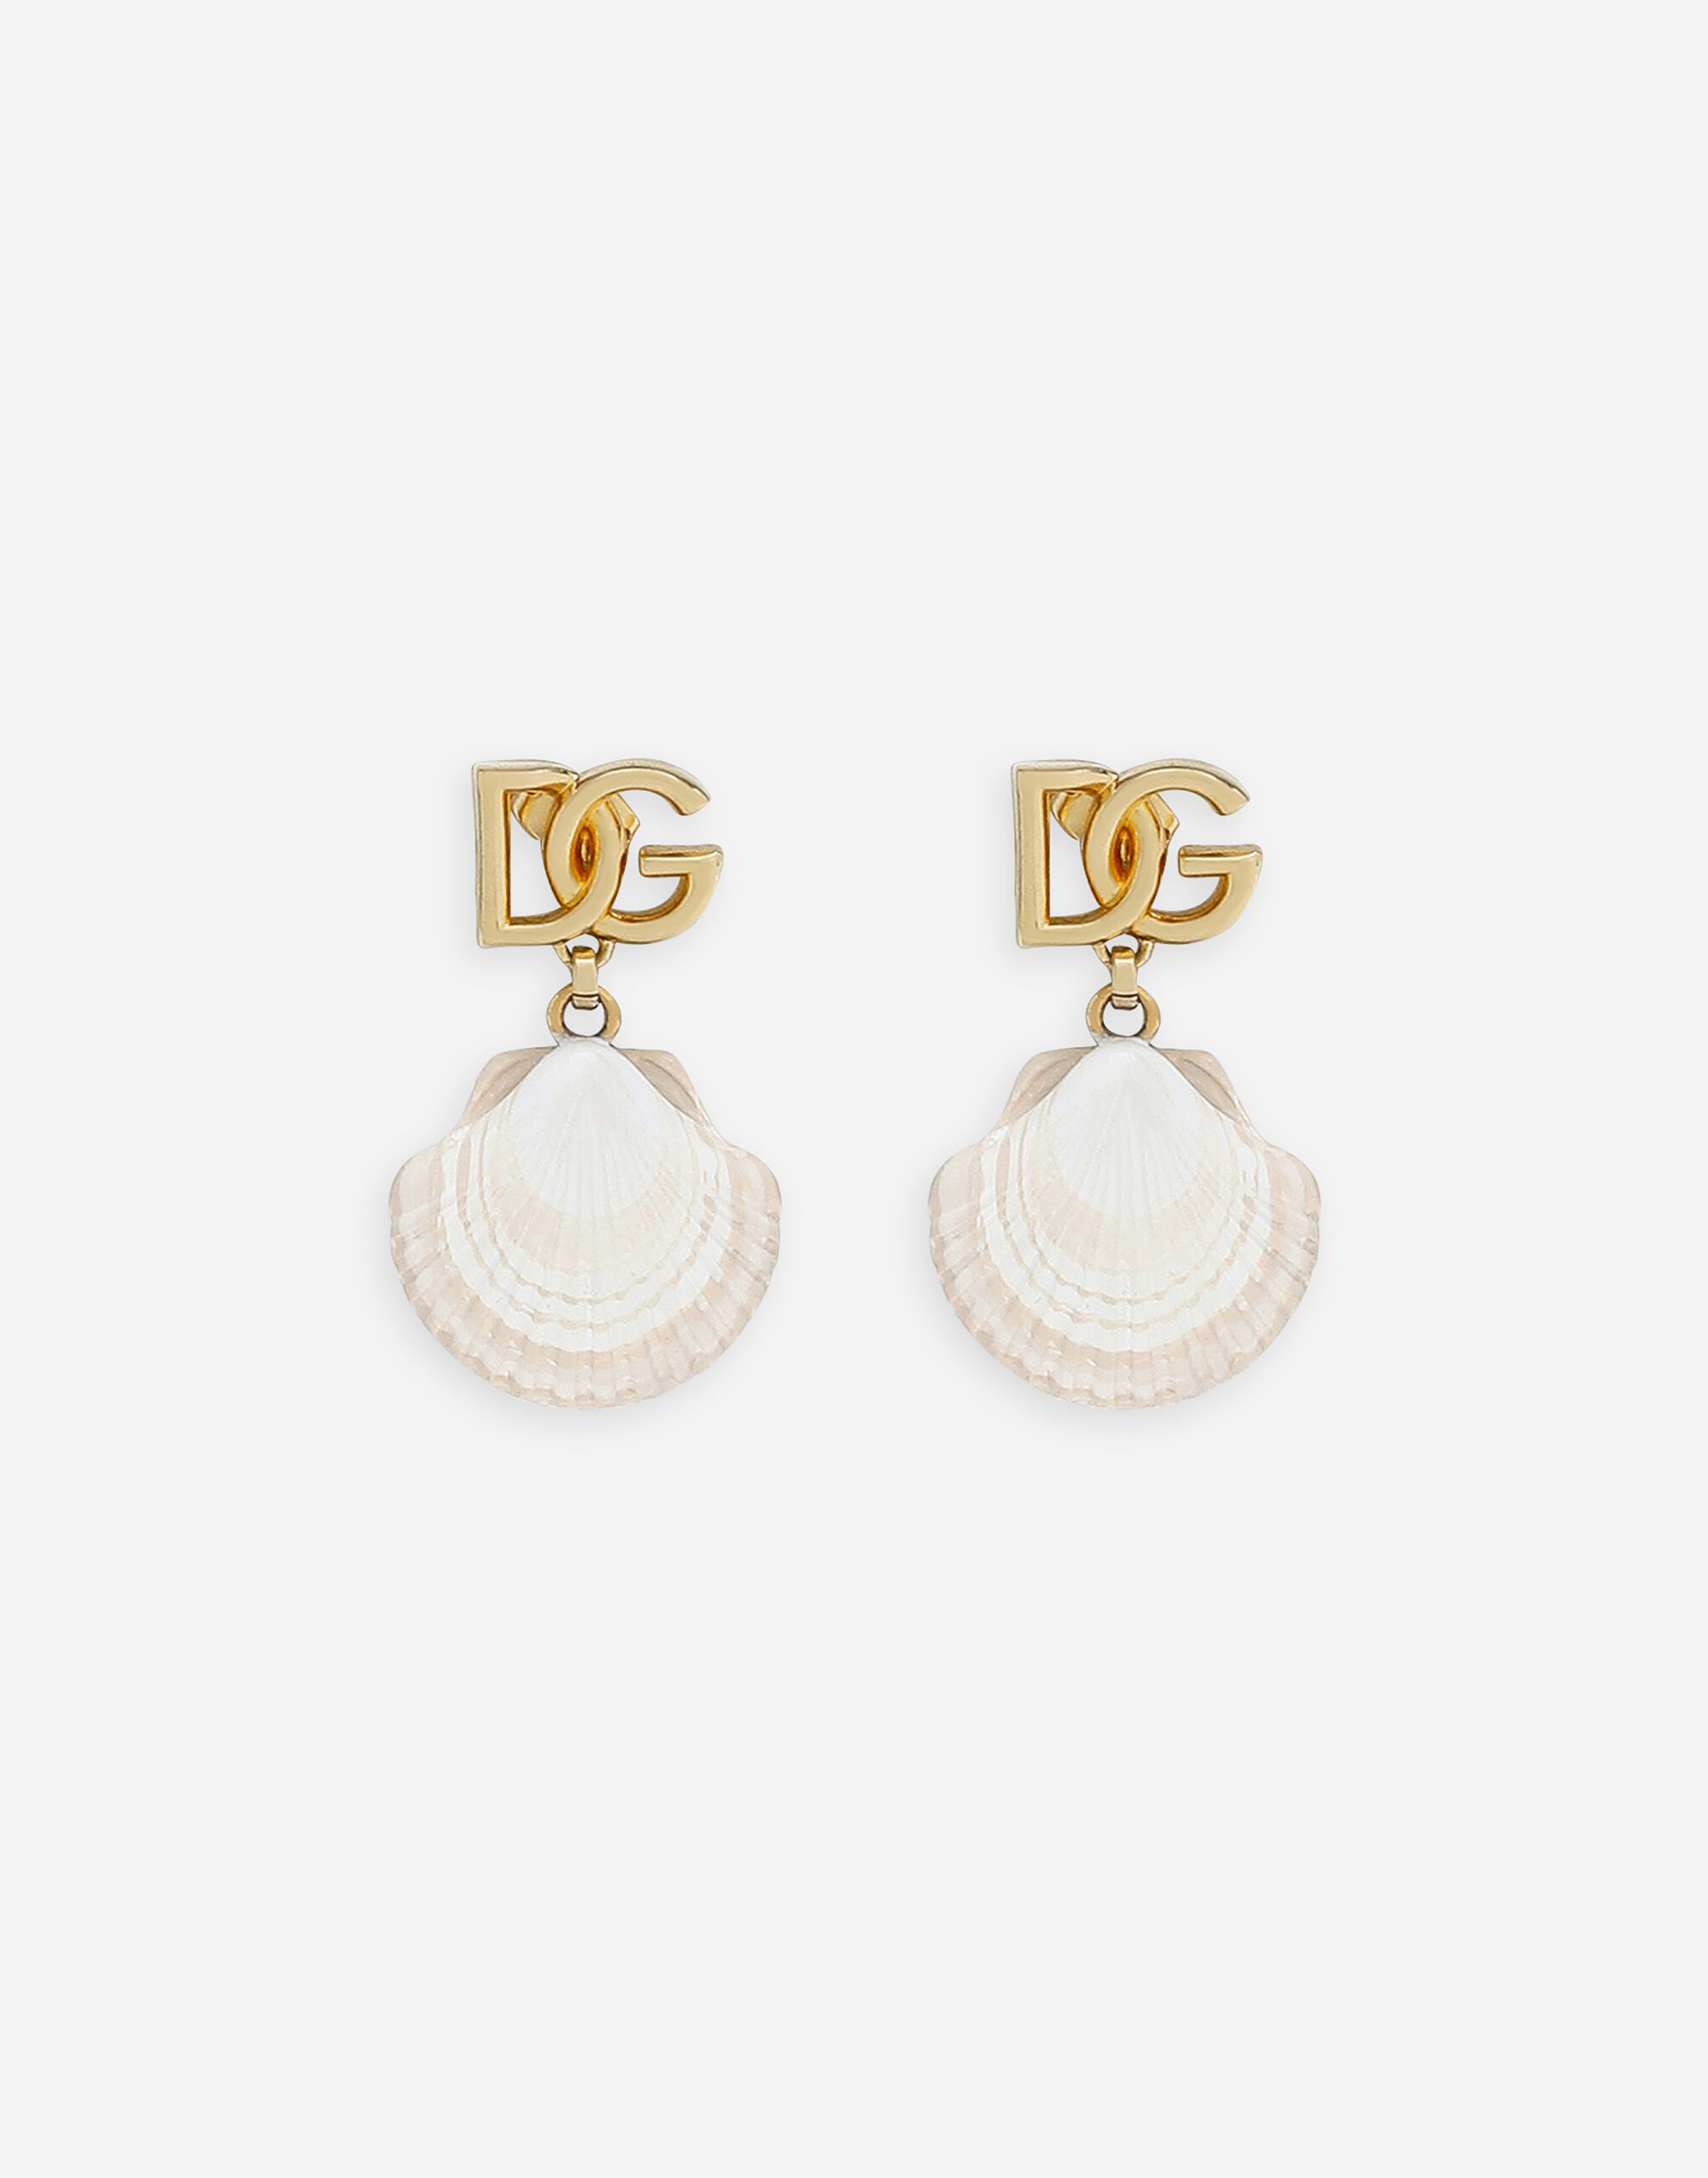 Dolce&Gabbana Earrings with DG logo and shell Brown FS215AGDBY0